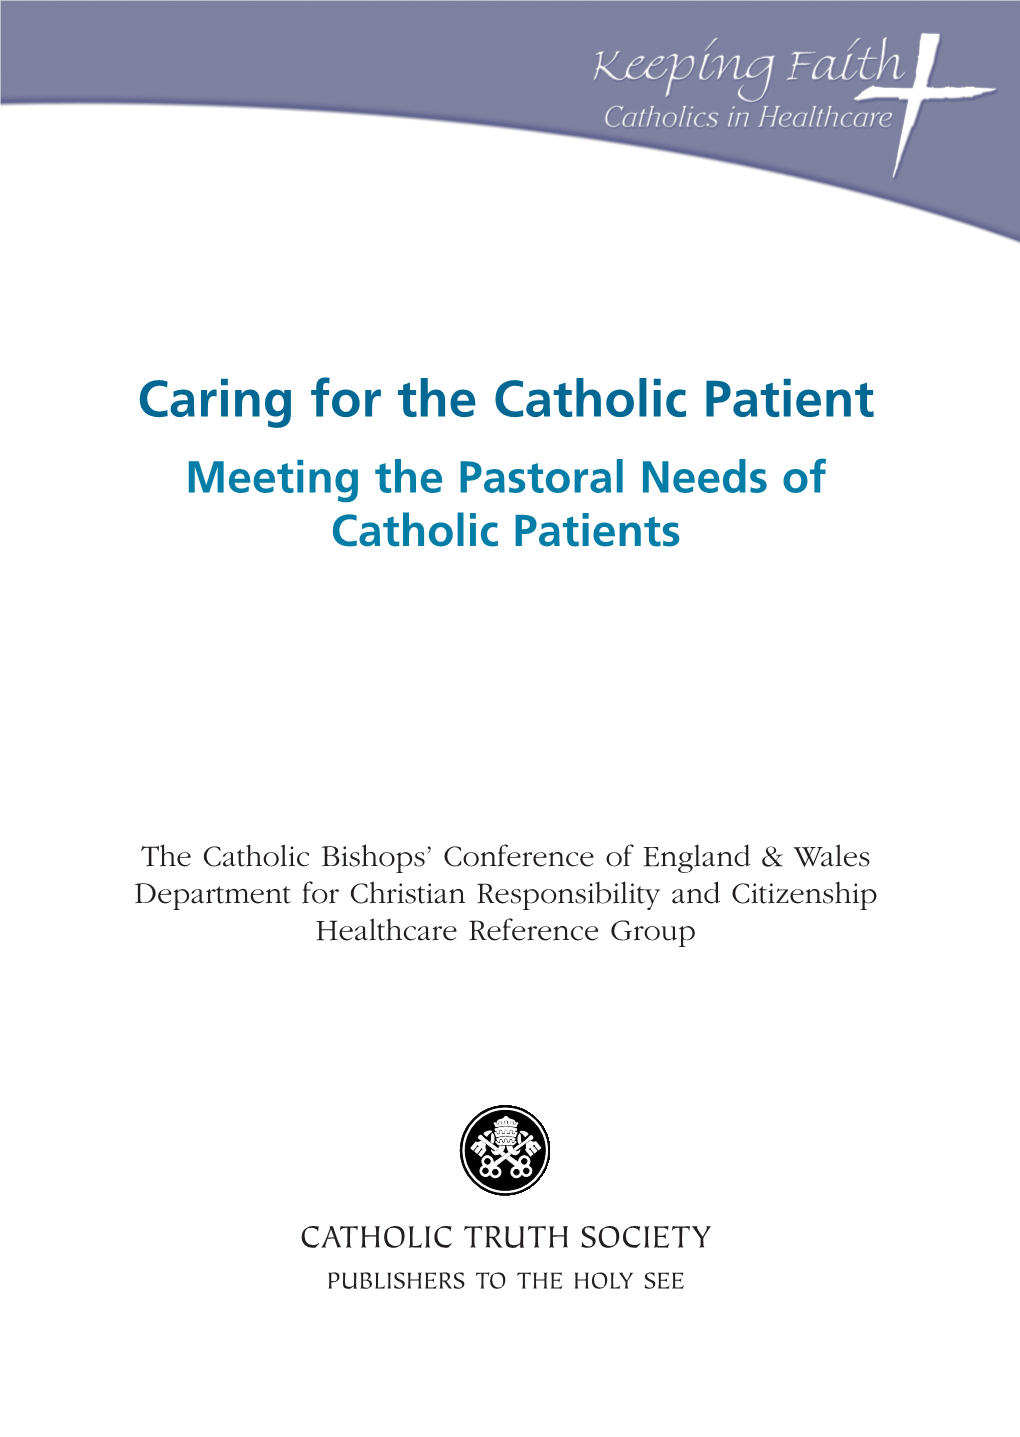 Caring for the Catholic Patient Meeting the Pastoral Needs of Catholic Patients